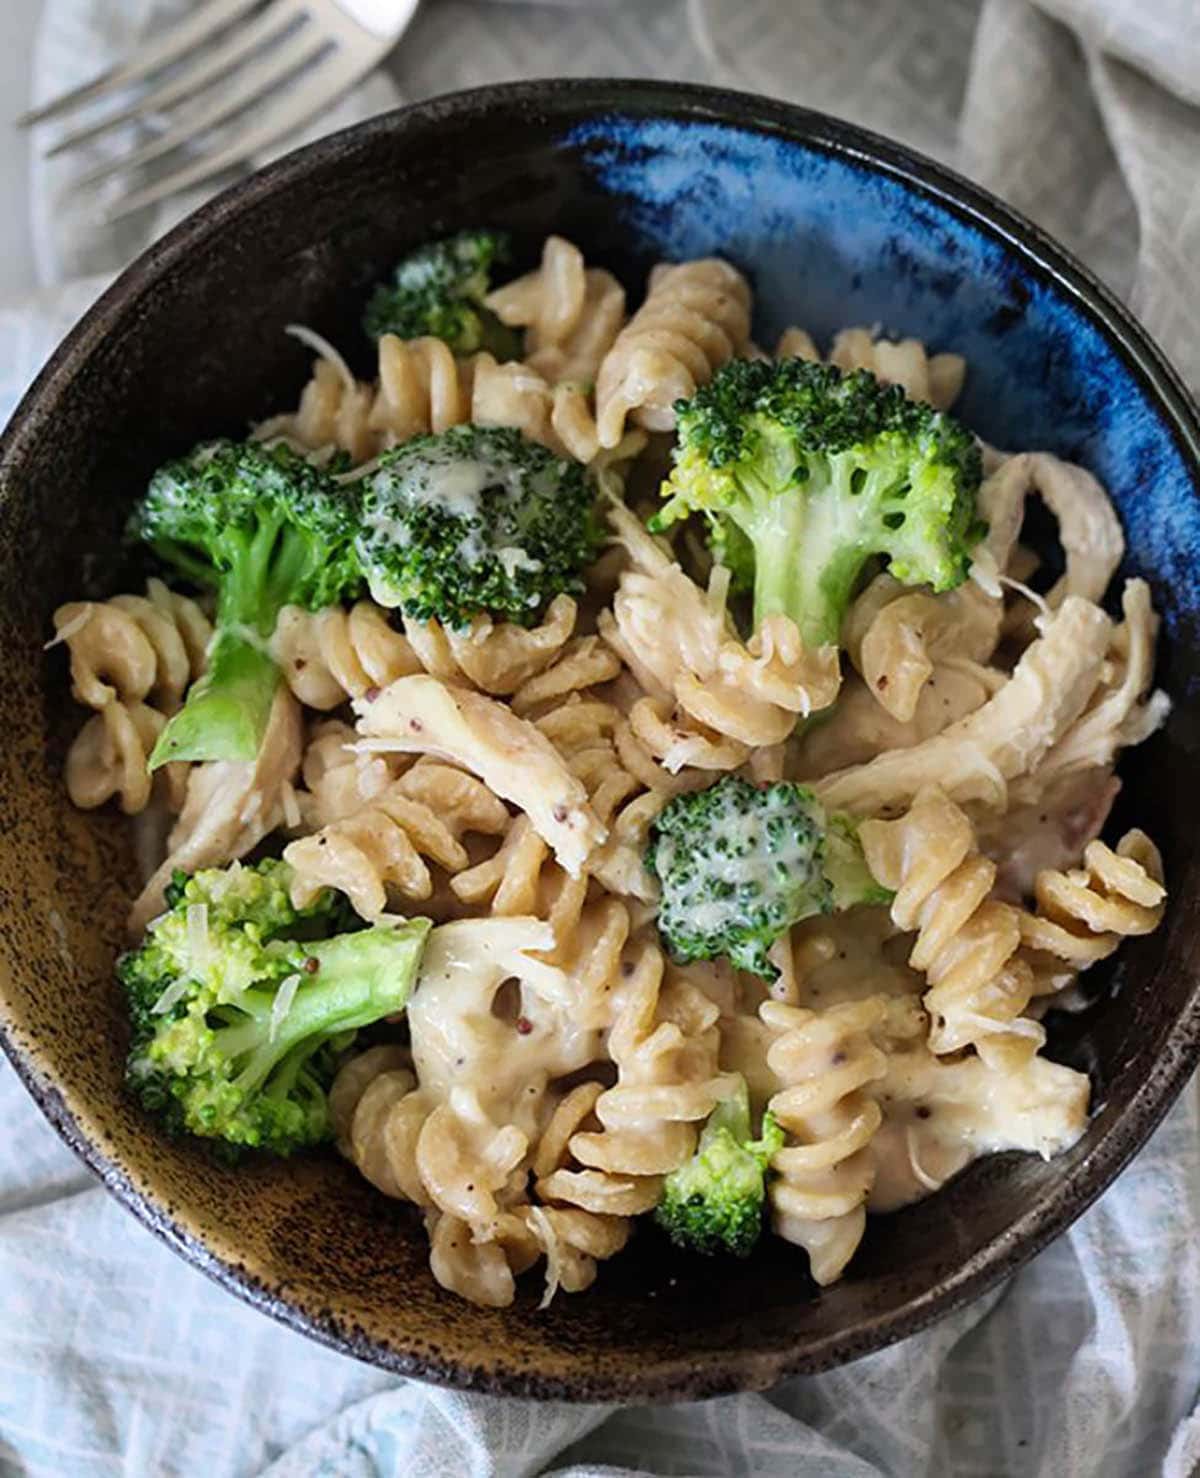 Whole Wheat Broccoli With Cheese And Pasta